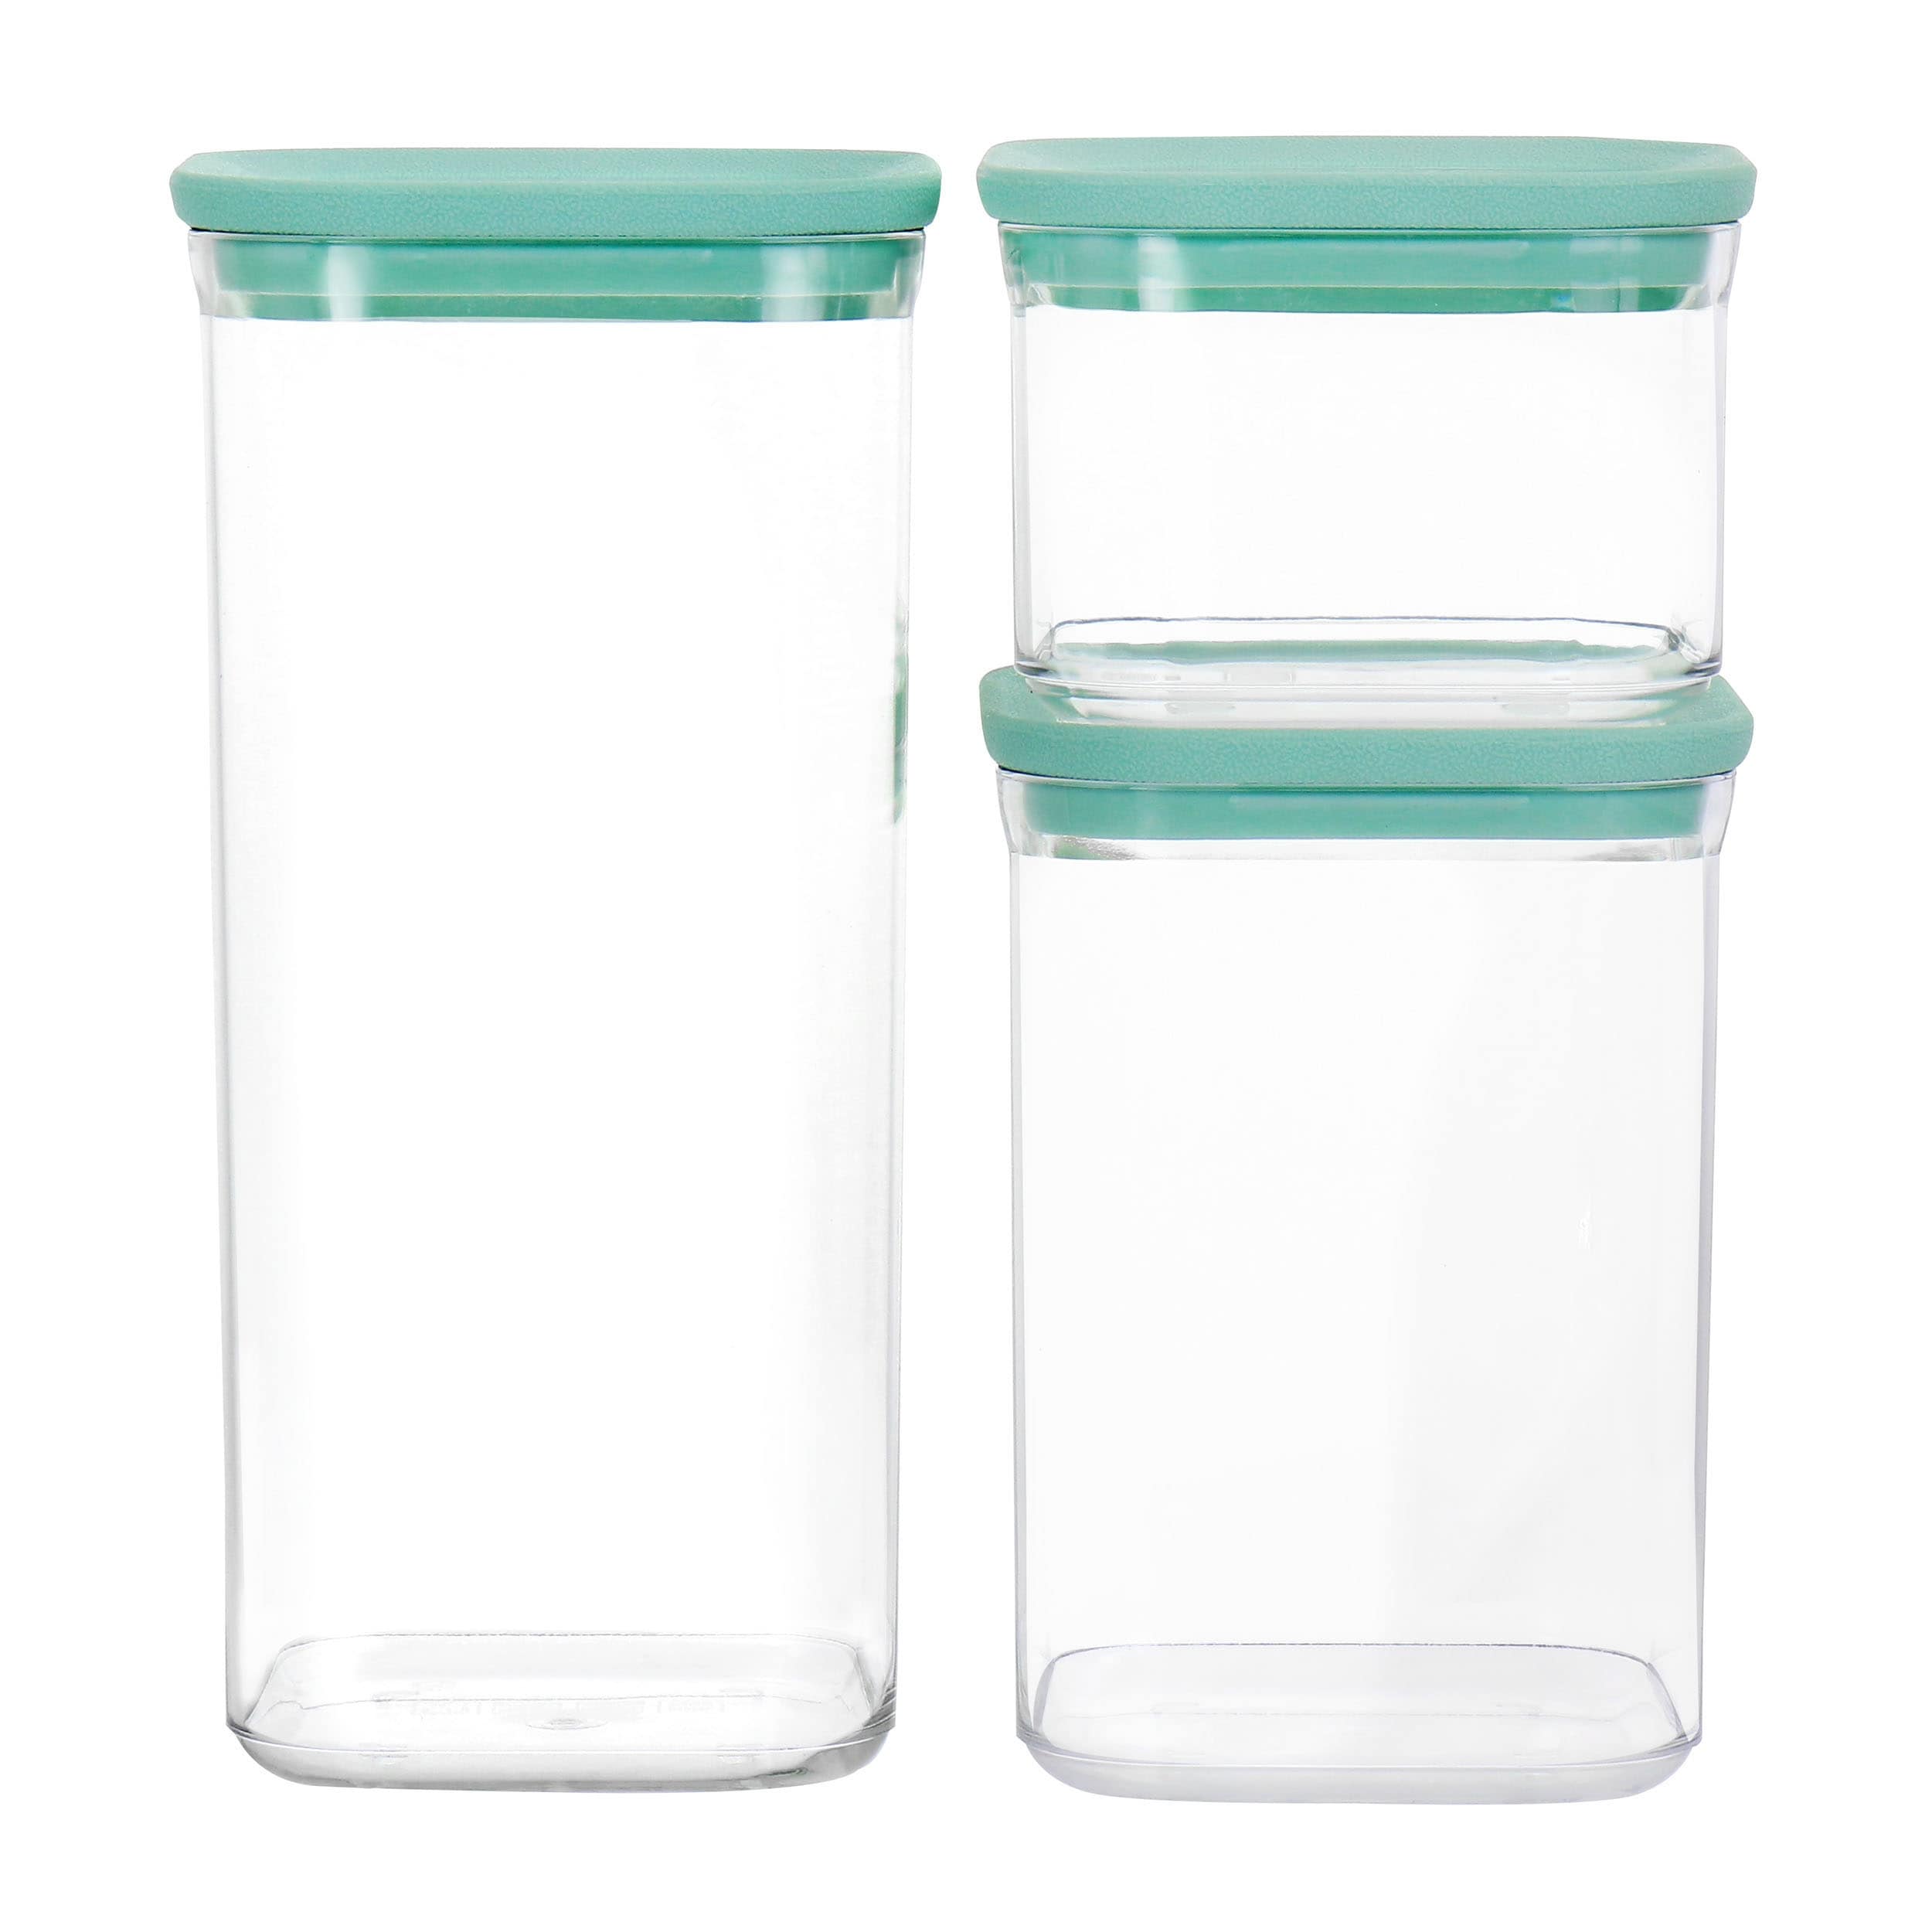 https://ak1.ostkcdn.com/images/products/is/images/direct/1440be2133605824e7d3a3cf5766abd999d03043/3-Piece-Plastic-Stackable-Container-Set-in-Mint-Green.jpg